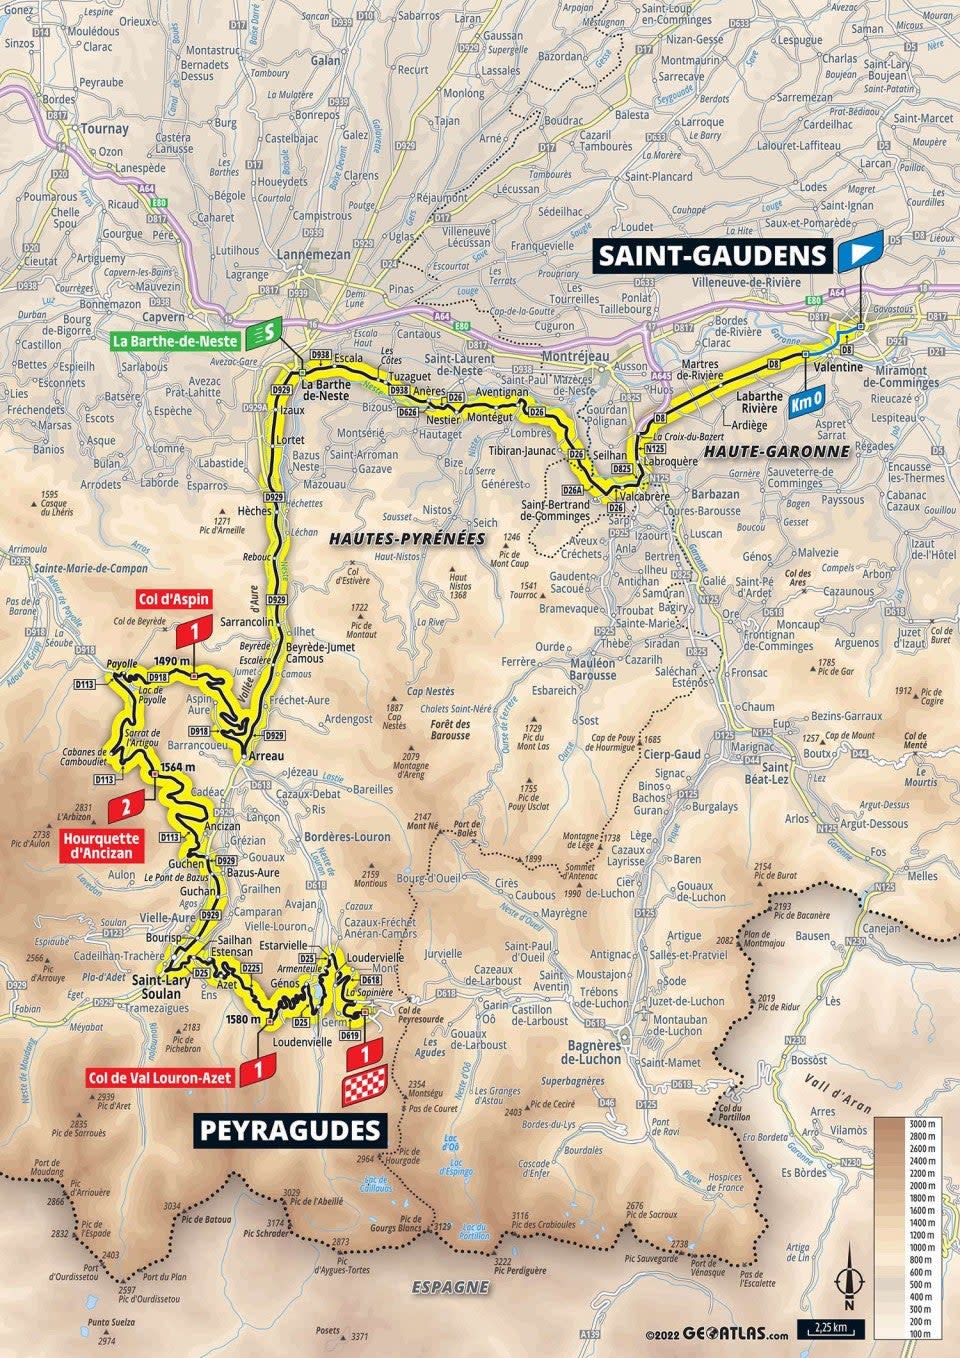 Stage 17 map (letour)